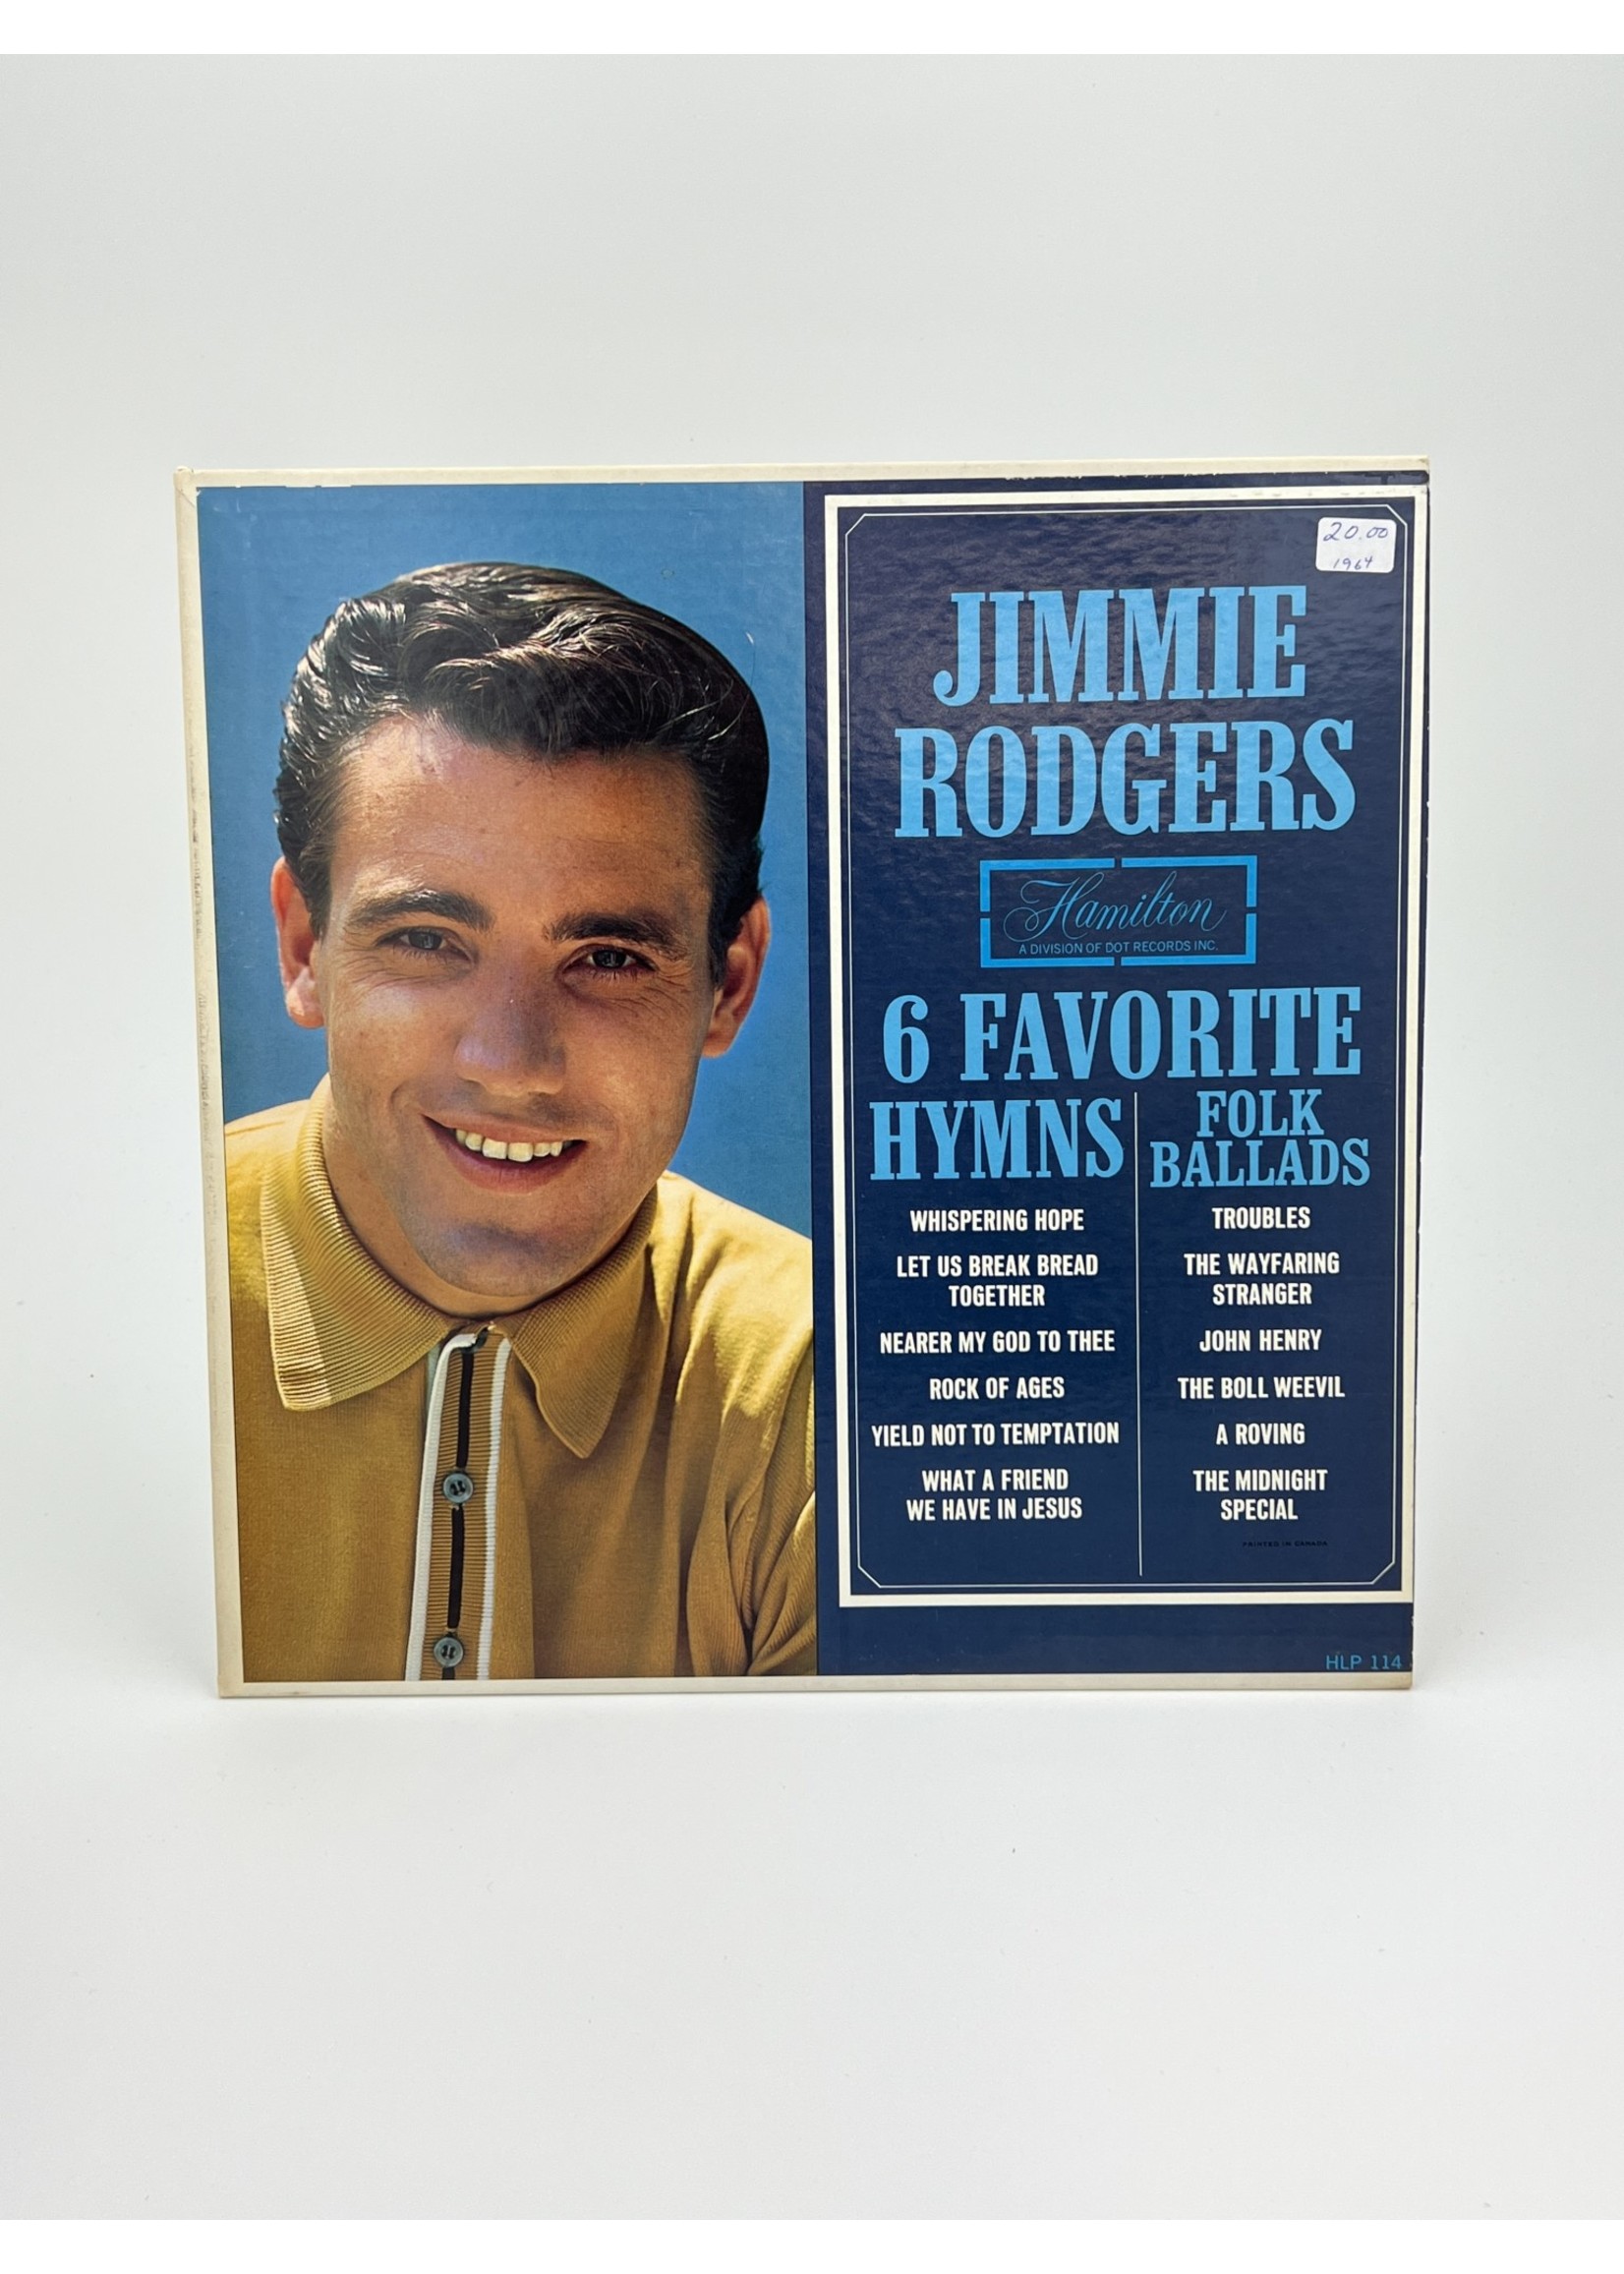 LP Jimmie Rodgers 6 Favorite Hymns and Folk Ballads LP Record